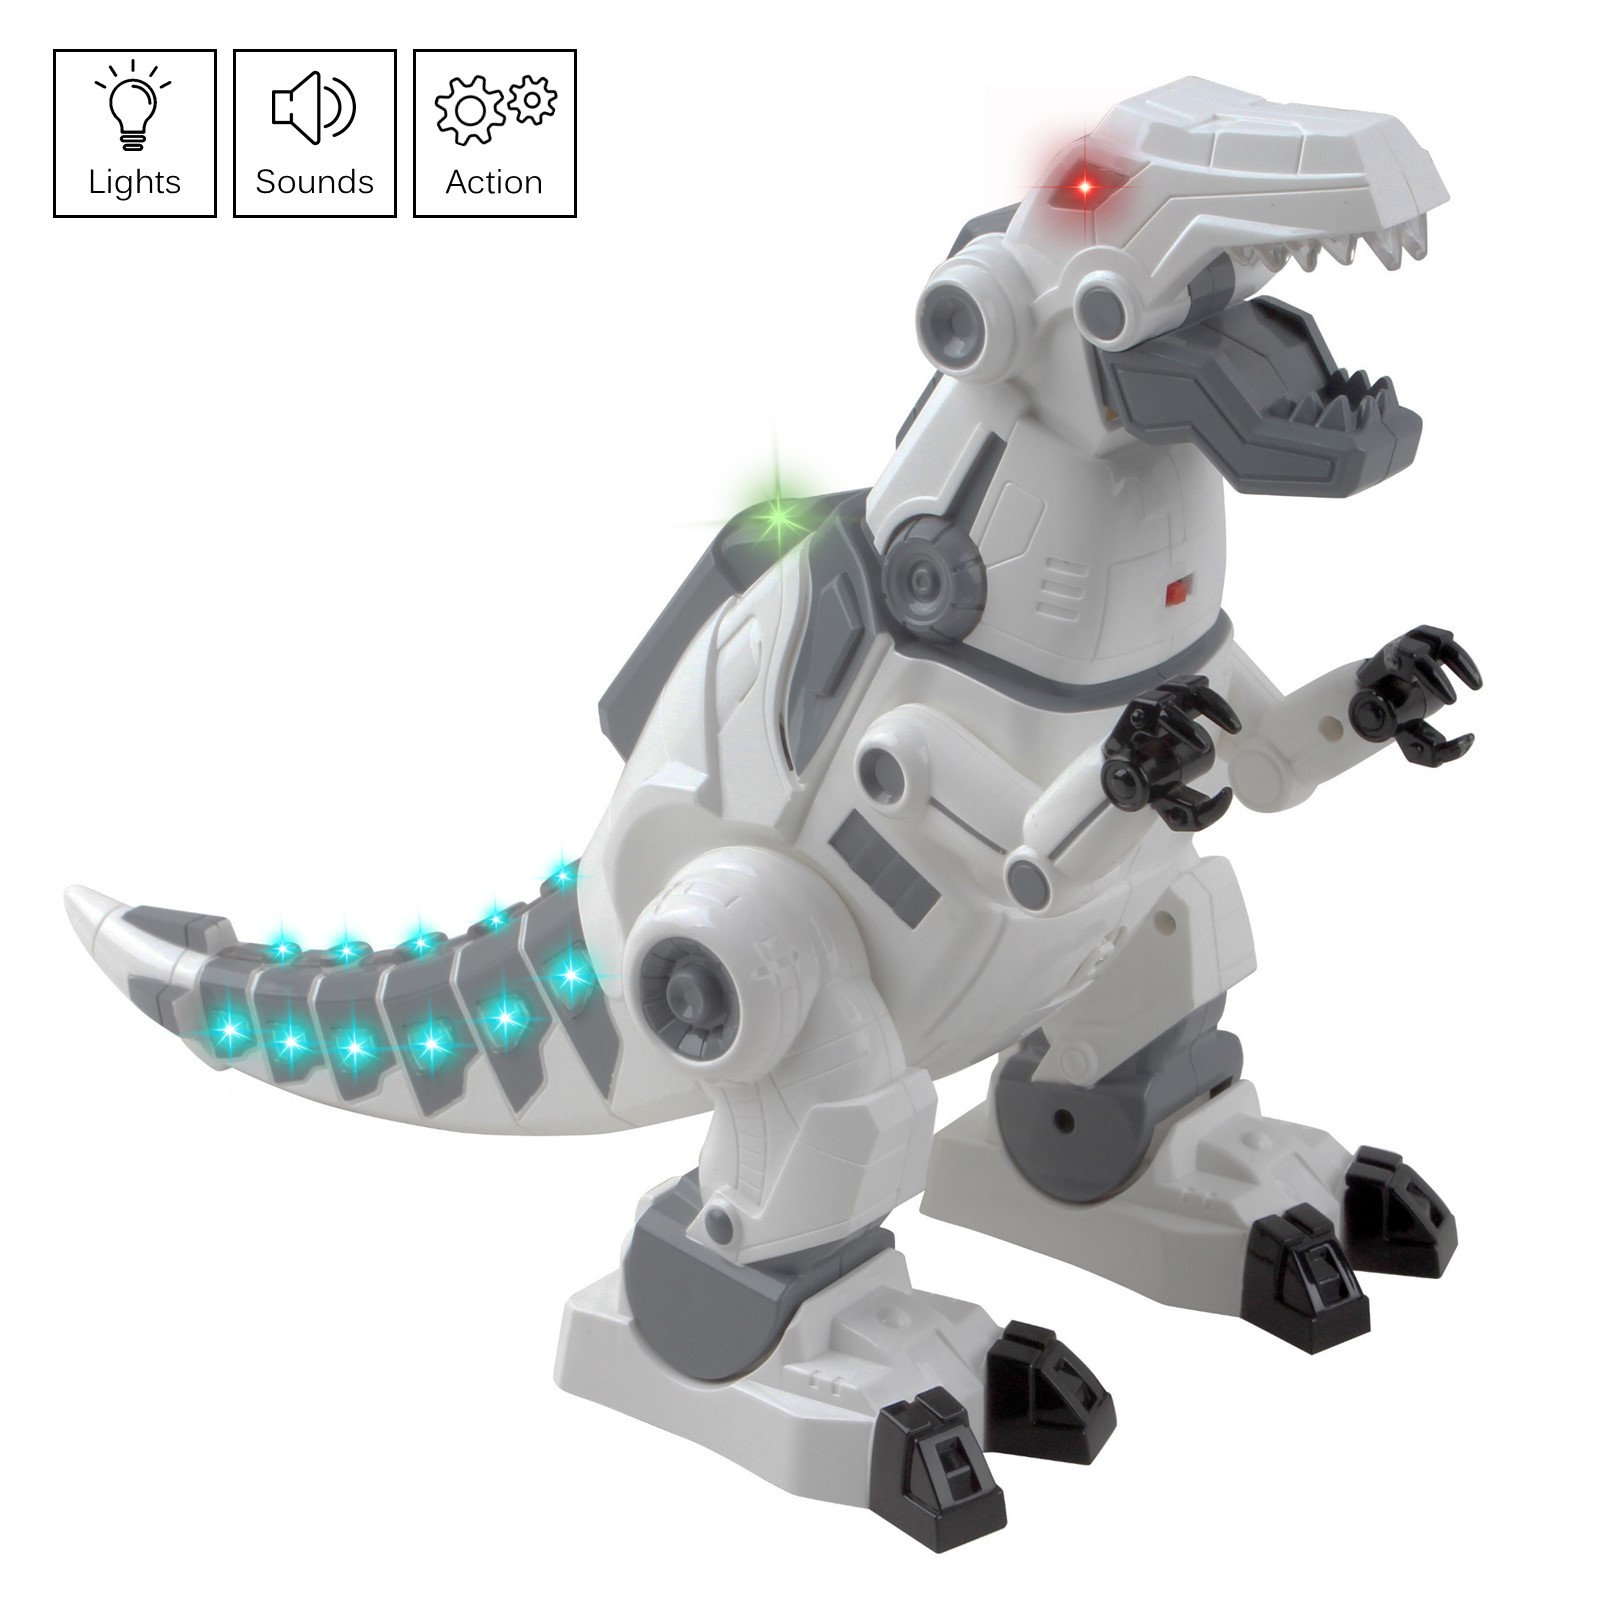 Tyrannosaurus rex Walking Robot Dinosaur With Flashing Lights And Sounds Interactive Kids Toy Smart Robotic T-Rex Pet Easy To Use Function Perfect Action For Boys Girls Toddlers Battery Operated White